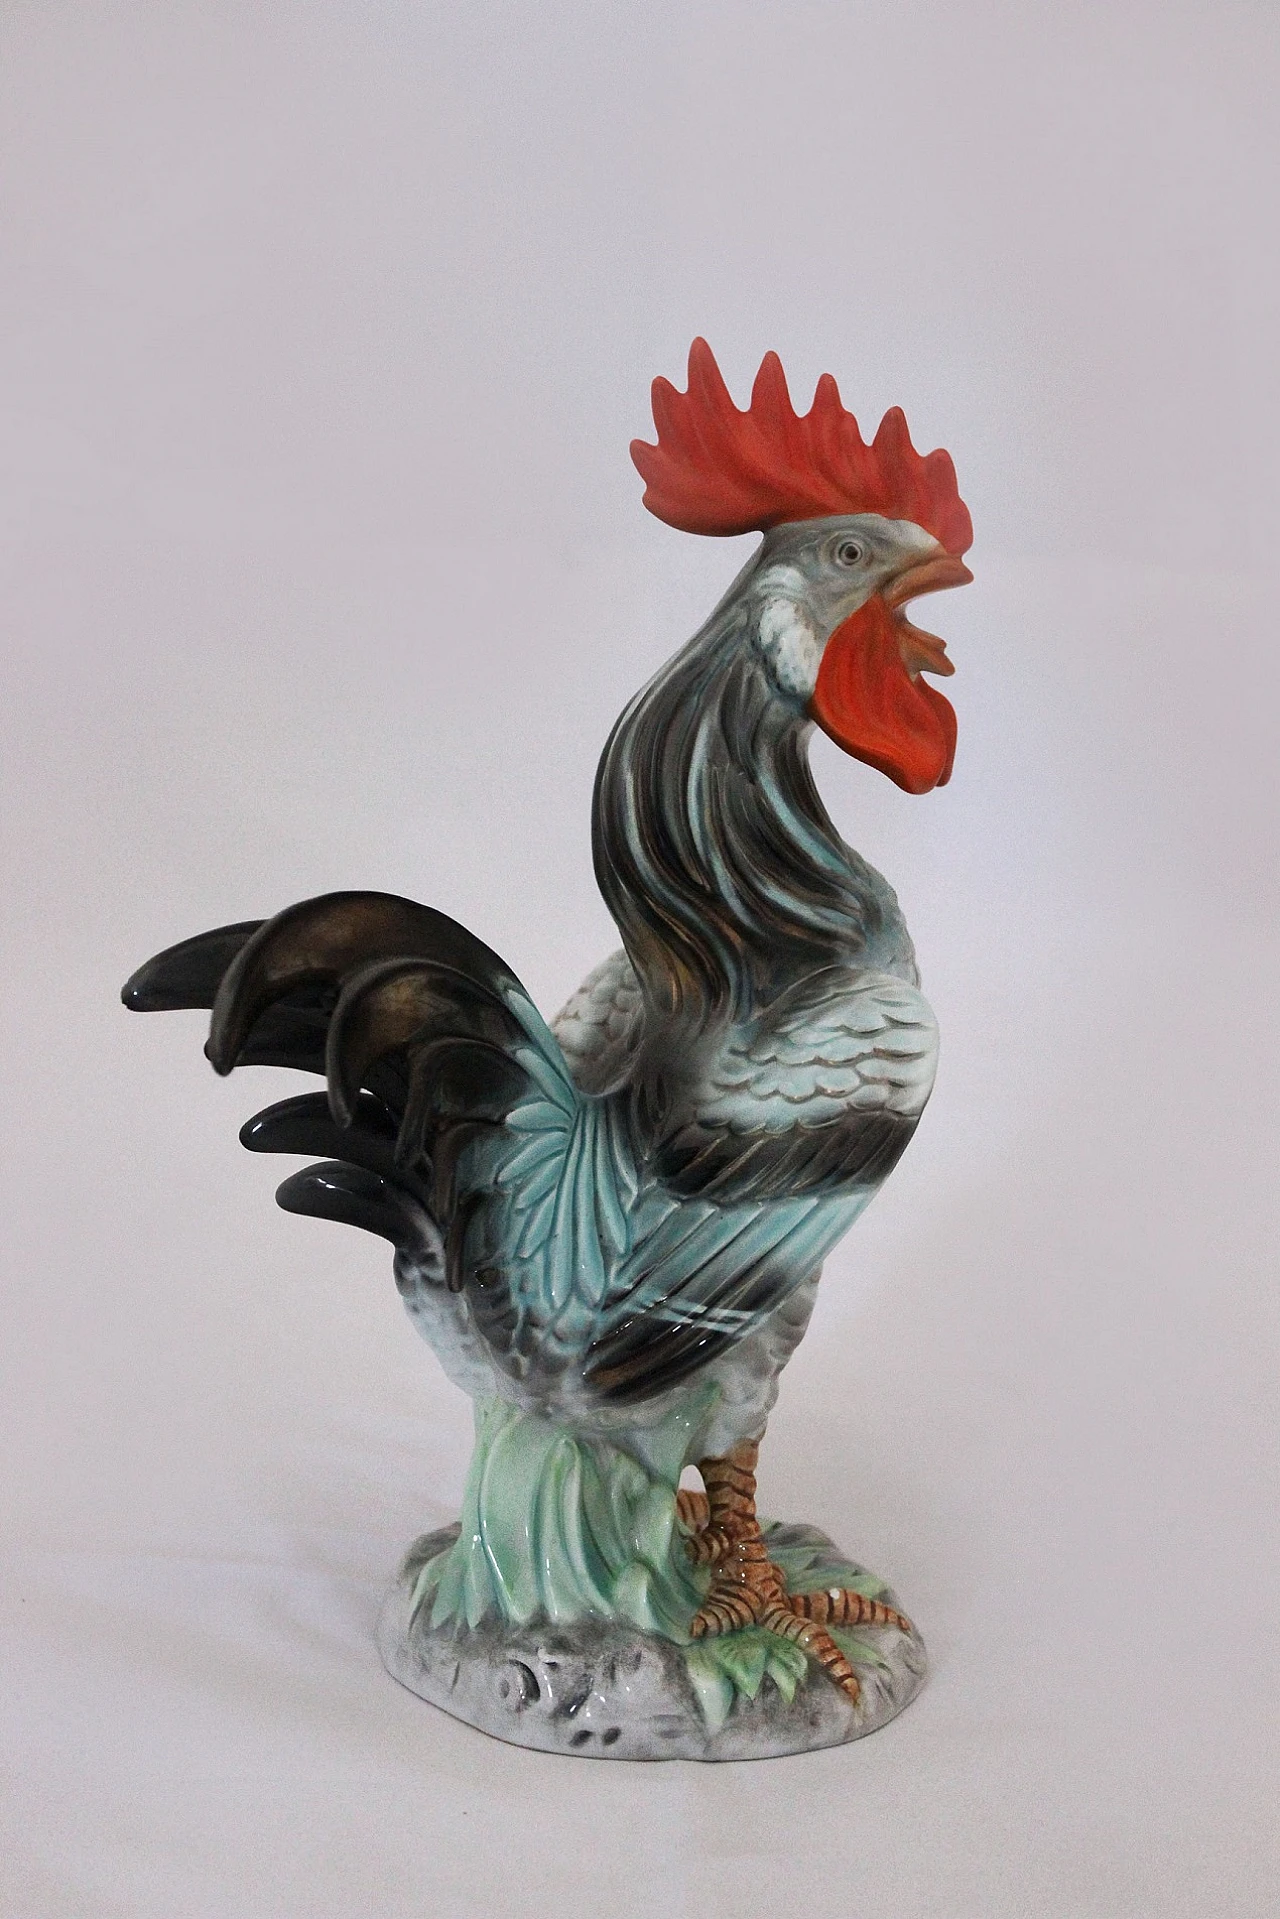 Ceramic rooster sculpture by Ronzan, 1940s 1